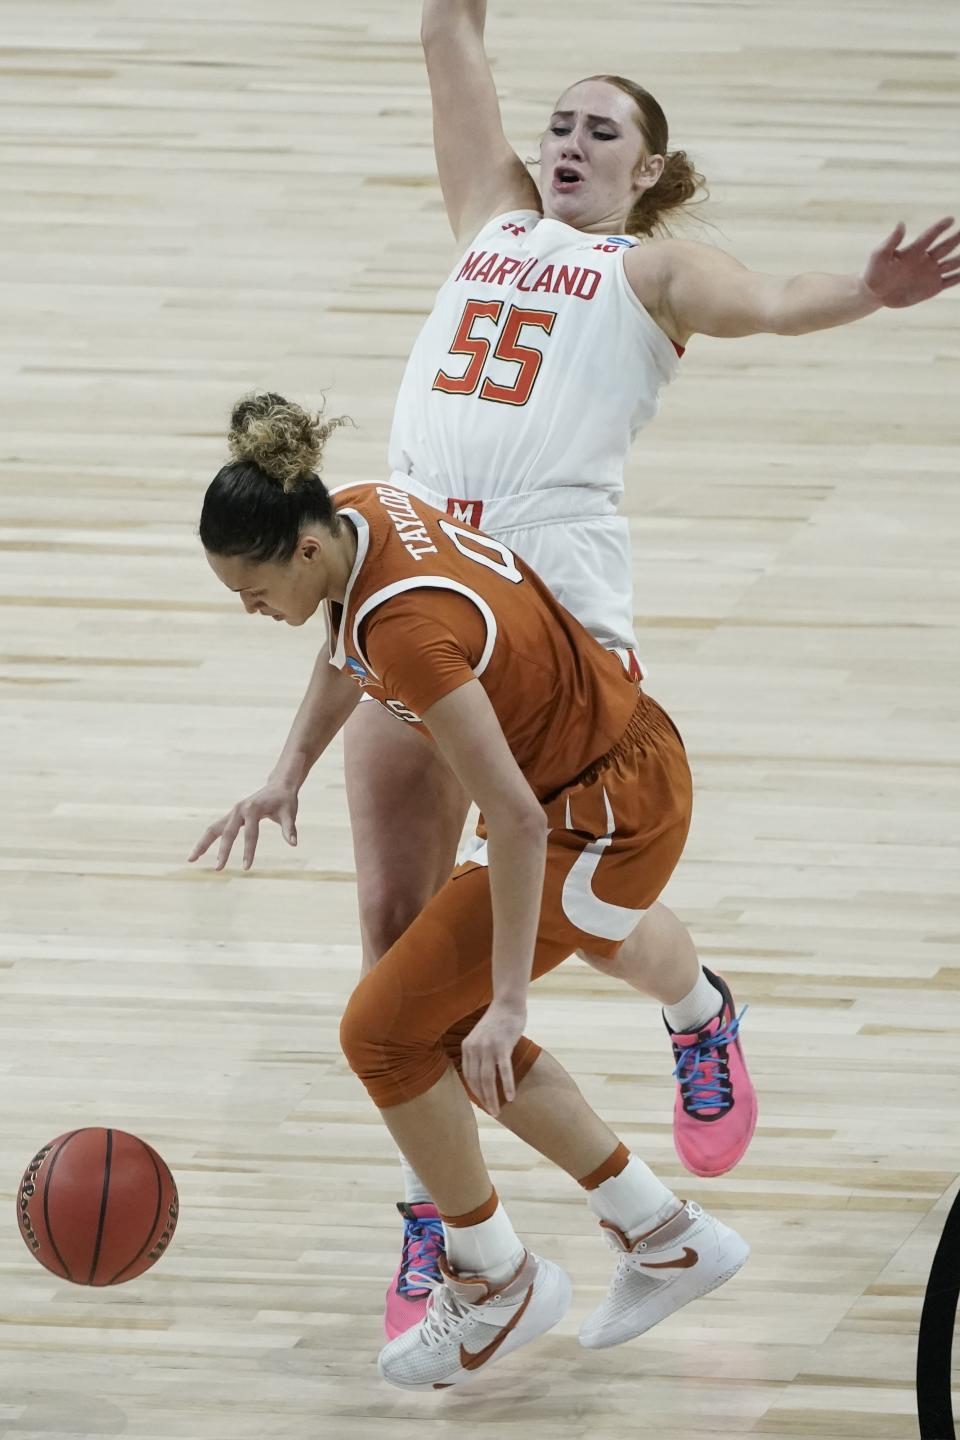 Maryland's Chloe Bibby tries to draw a charge on Texas's Celeste Taylor during the second half of an NCAA college basketball game in the Sweet 16 round of the Women's NCAA tournament Sunday, March 28, 2021, at the Alamodome in San Antonio. (AP Photo/Morry Gash)